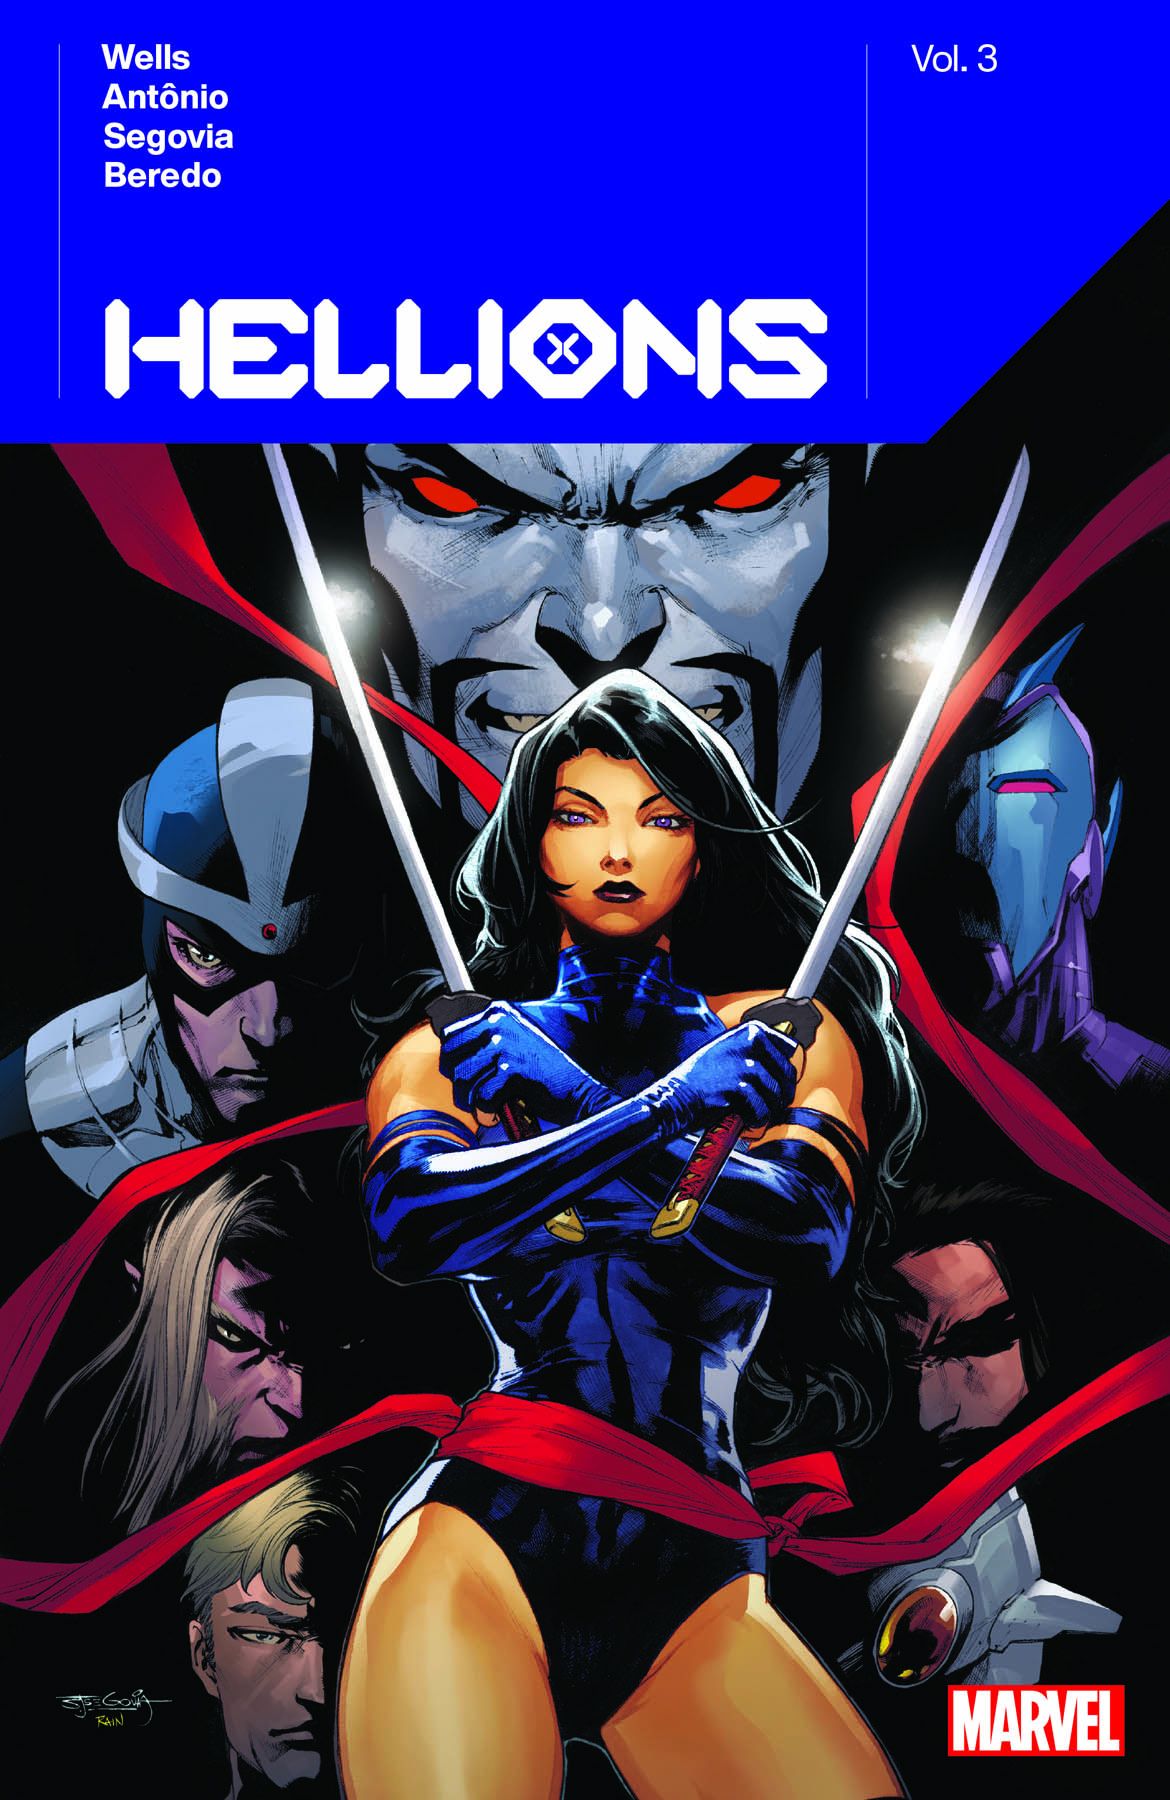 Hellions by Zeb Wells Vol. 3 (Trade Paperback)